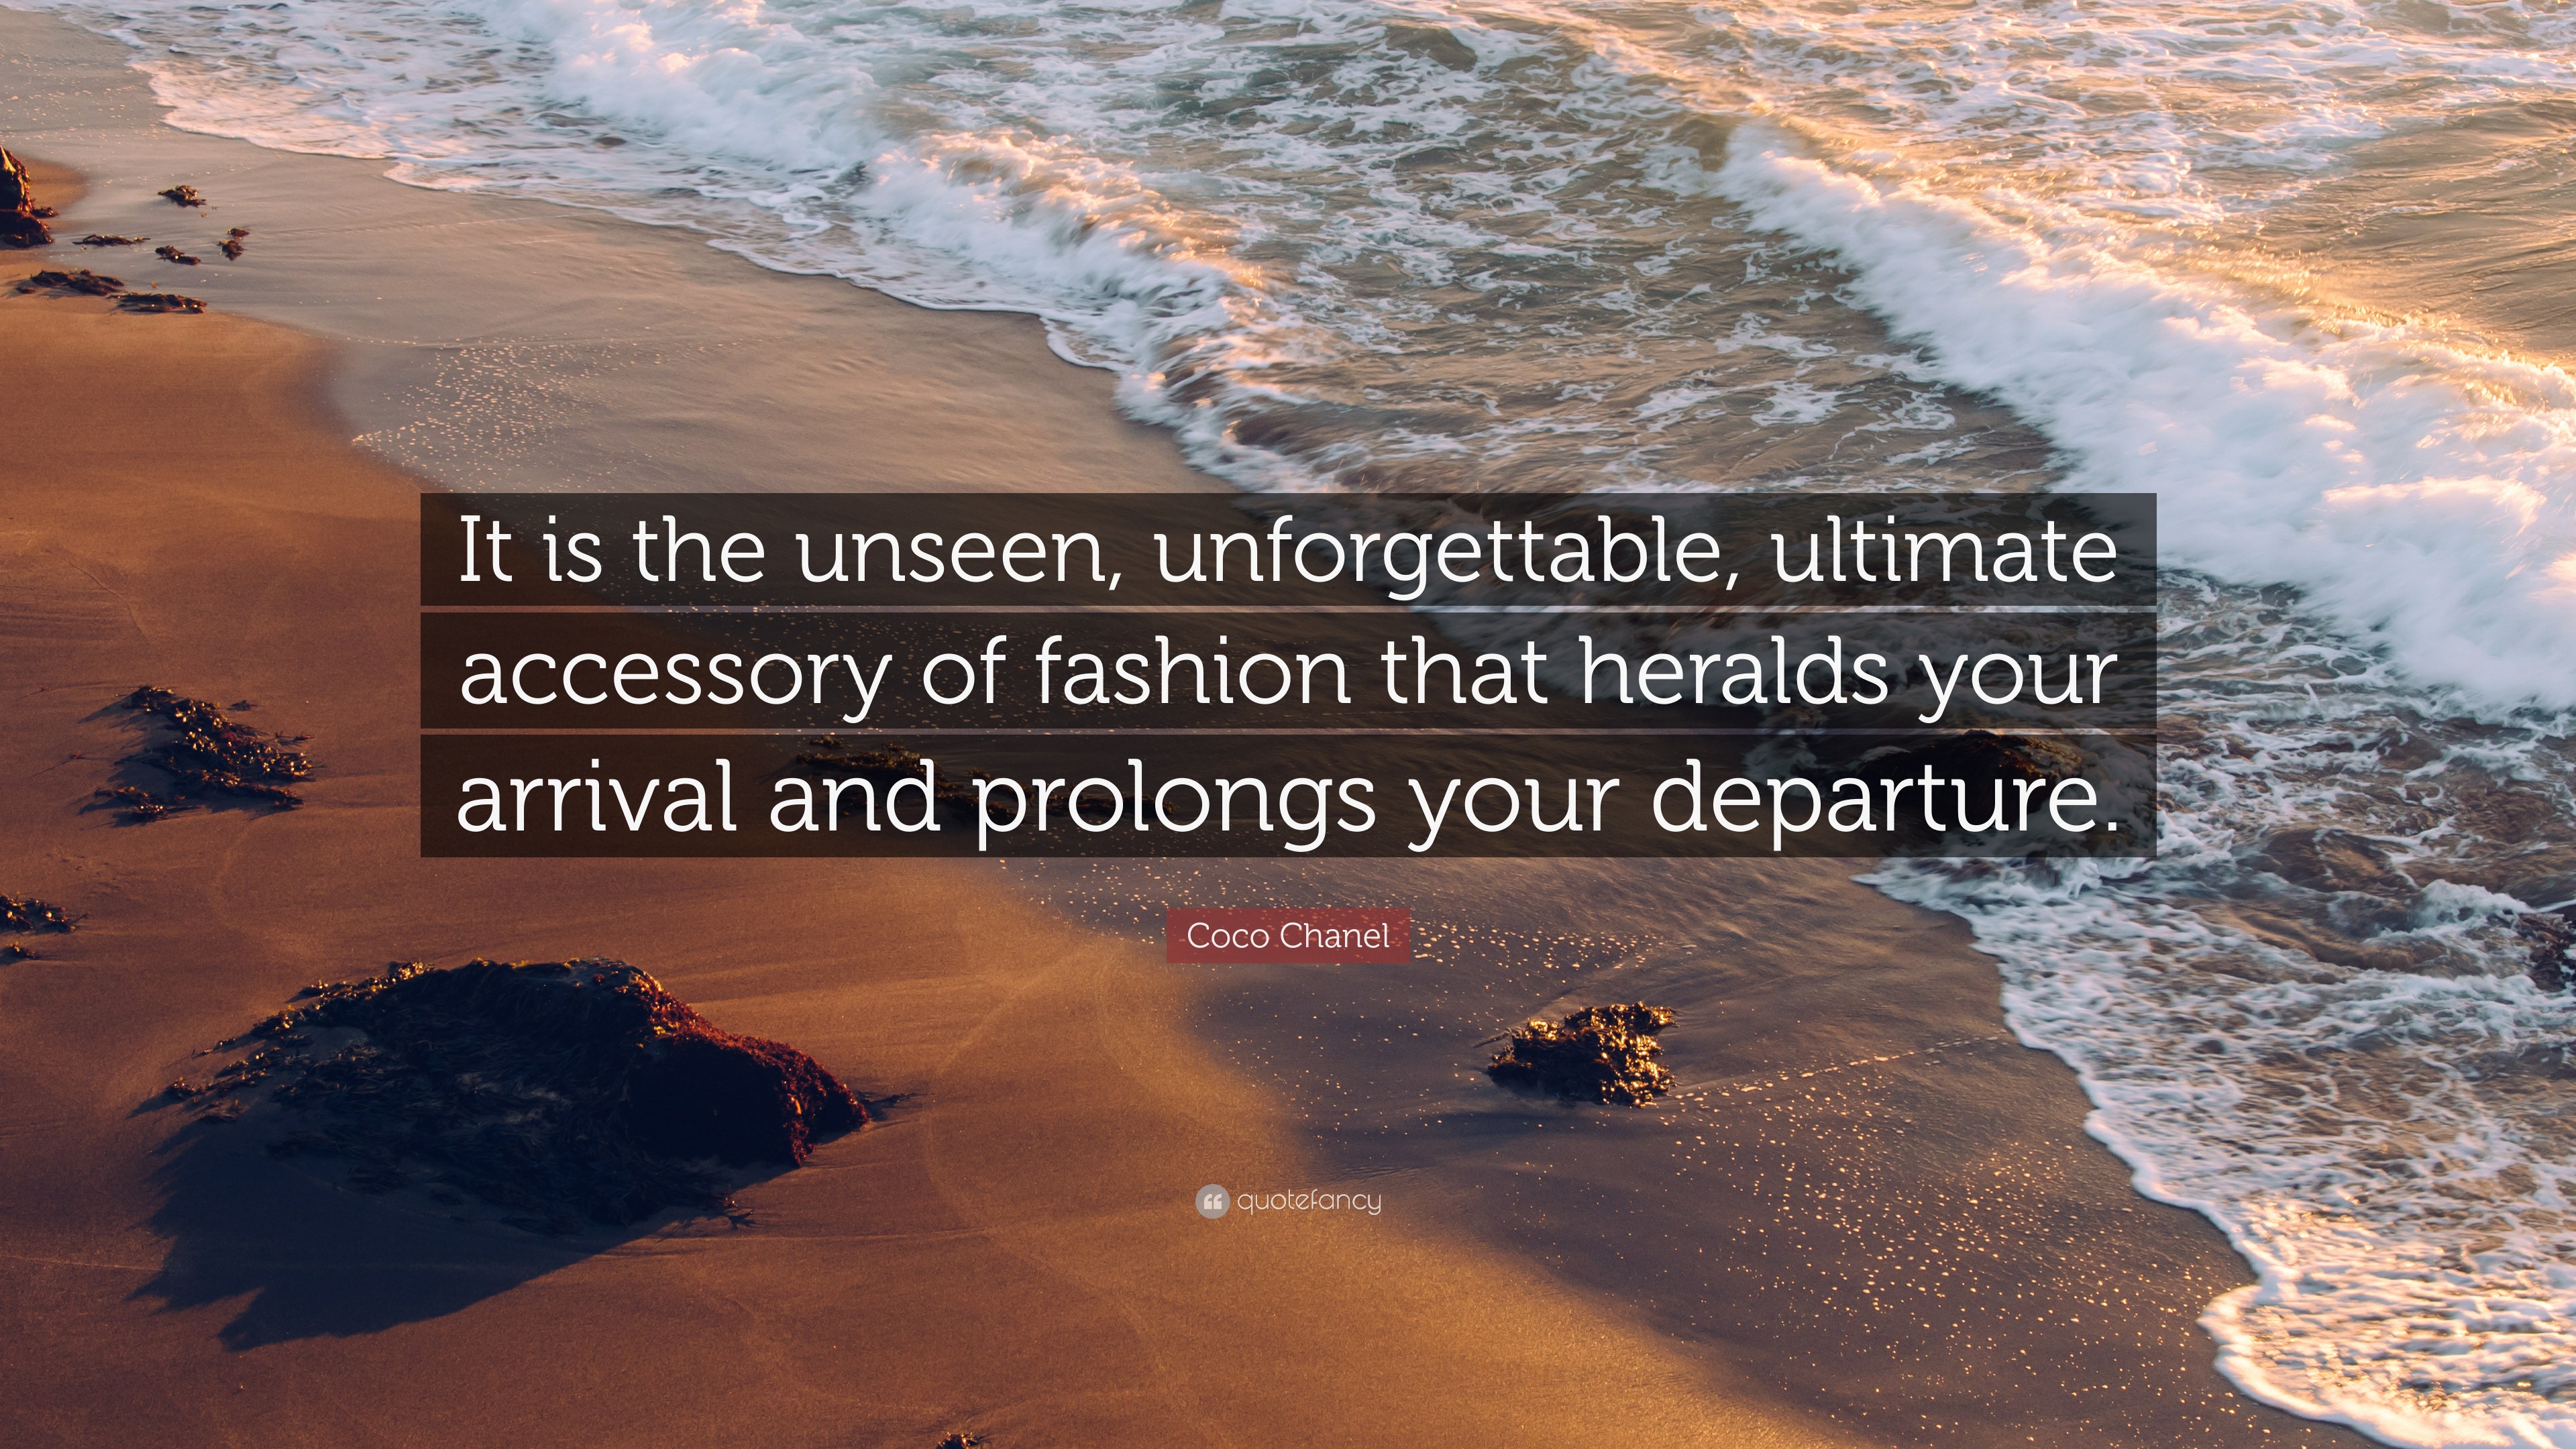 Coco Chanel Quote: “It is the unseen, unforgettable, ultimate